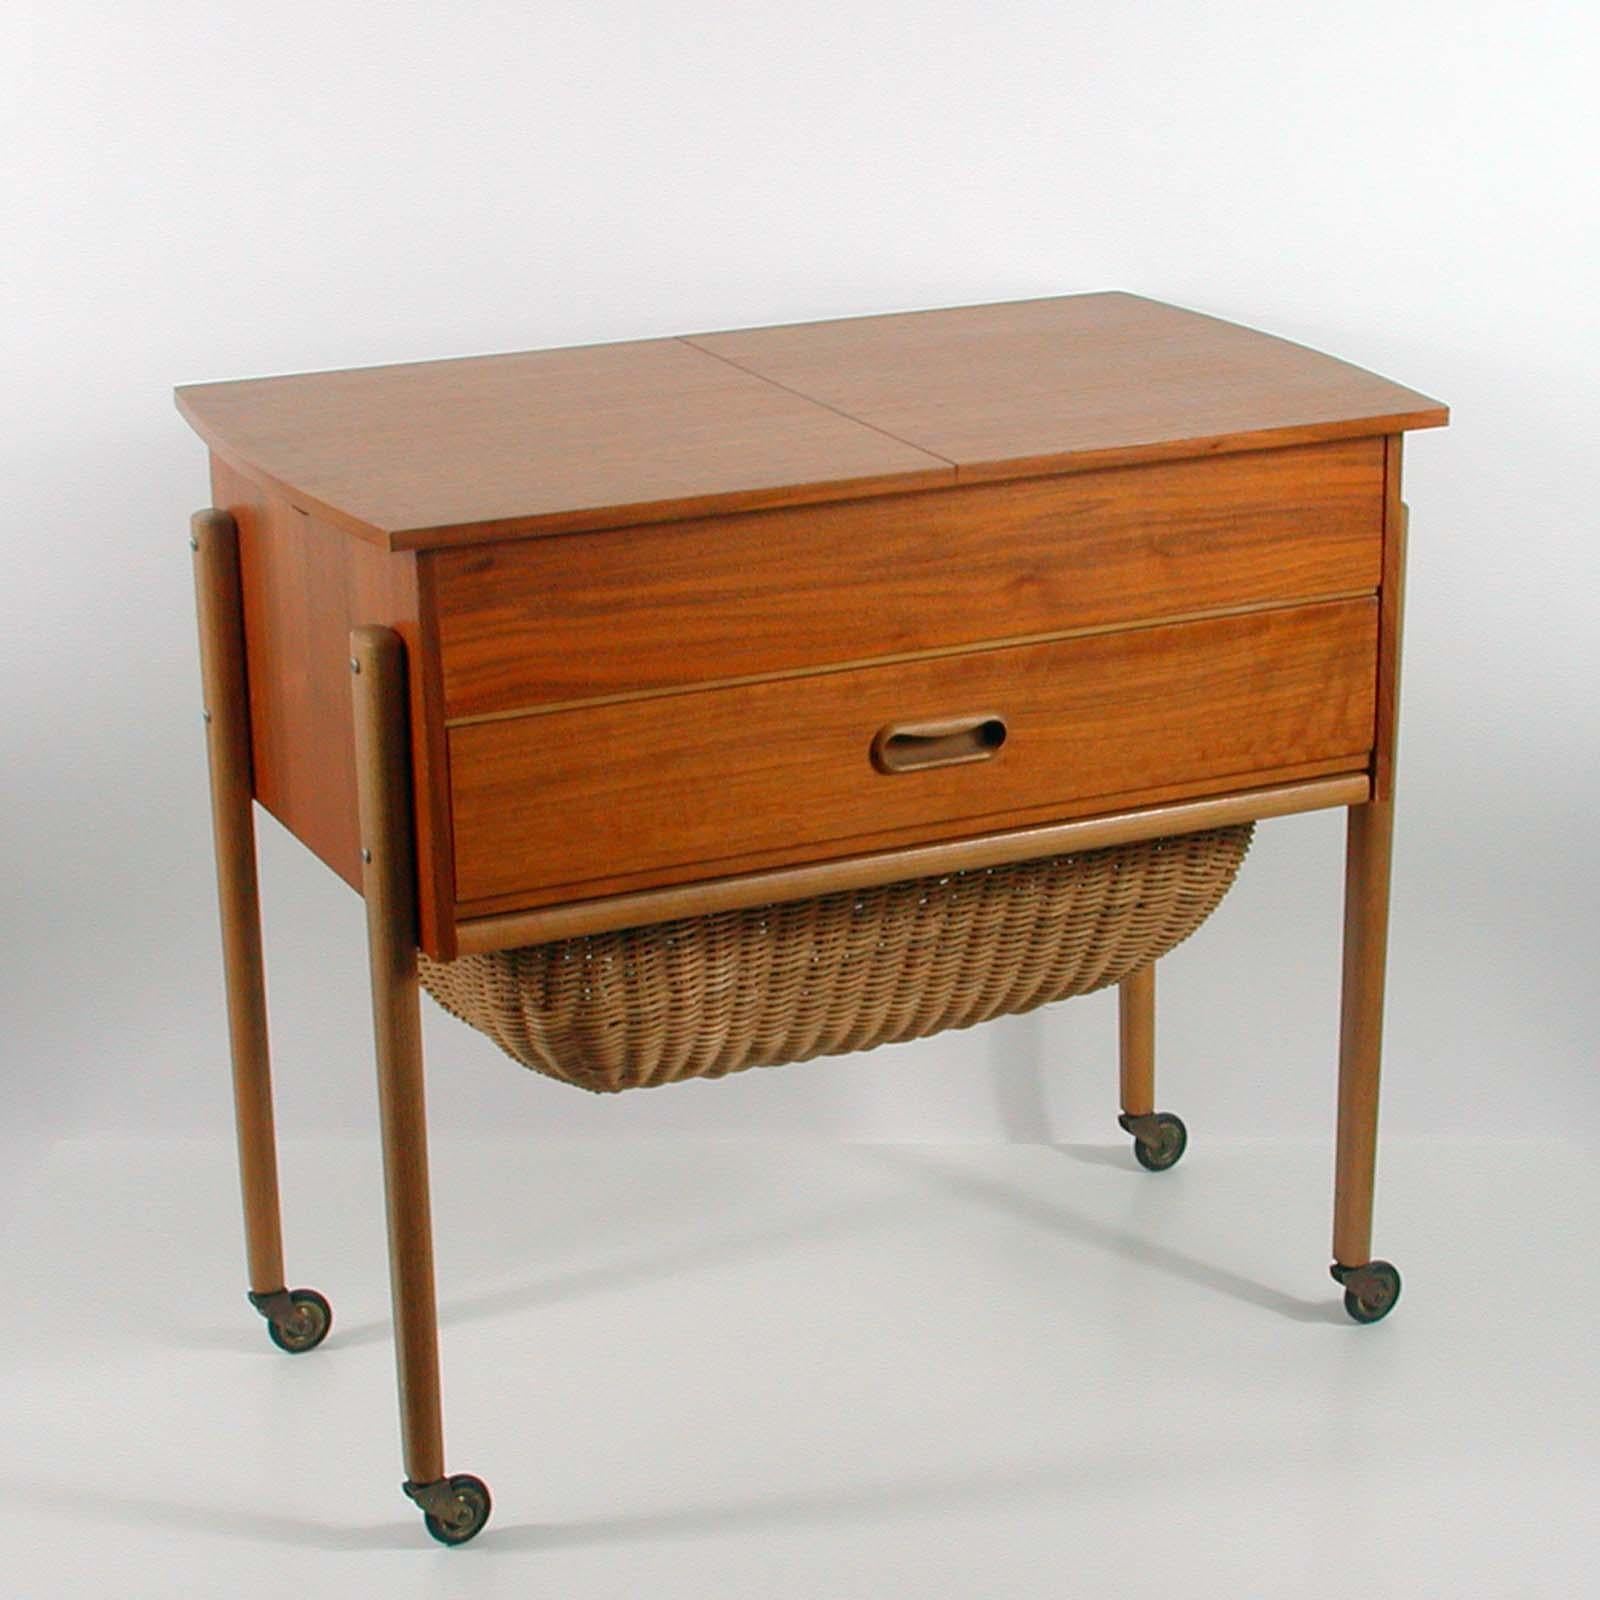 This awesome sewing box or cabinet was designed and manufactured in Denmark in the 1950s to 1960s.

The sewing table has got one drawer and a built in pull out basket underneath. The two top pieces slide apart. It is made of teak with birch